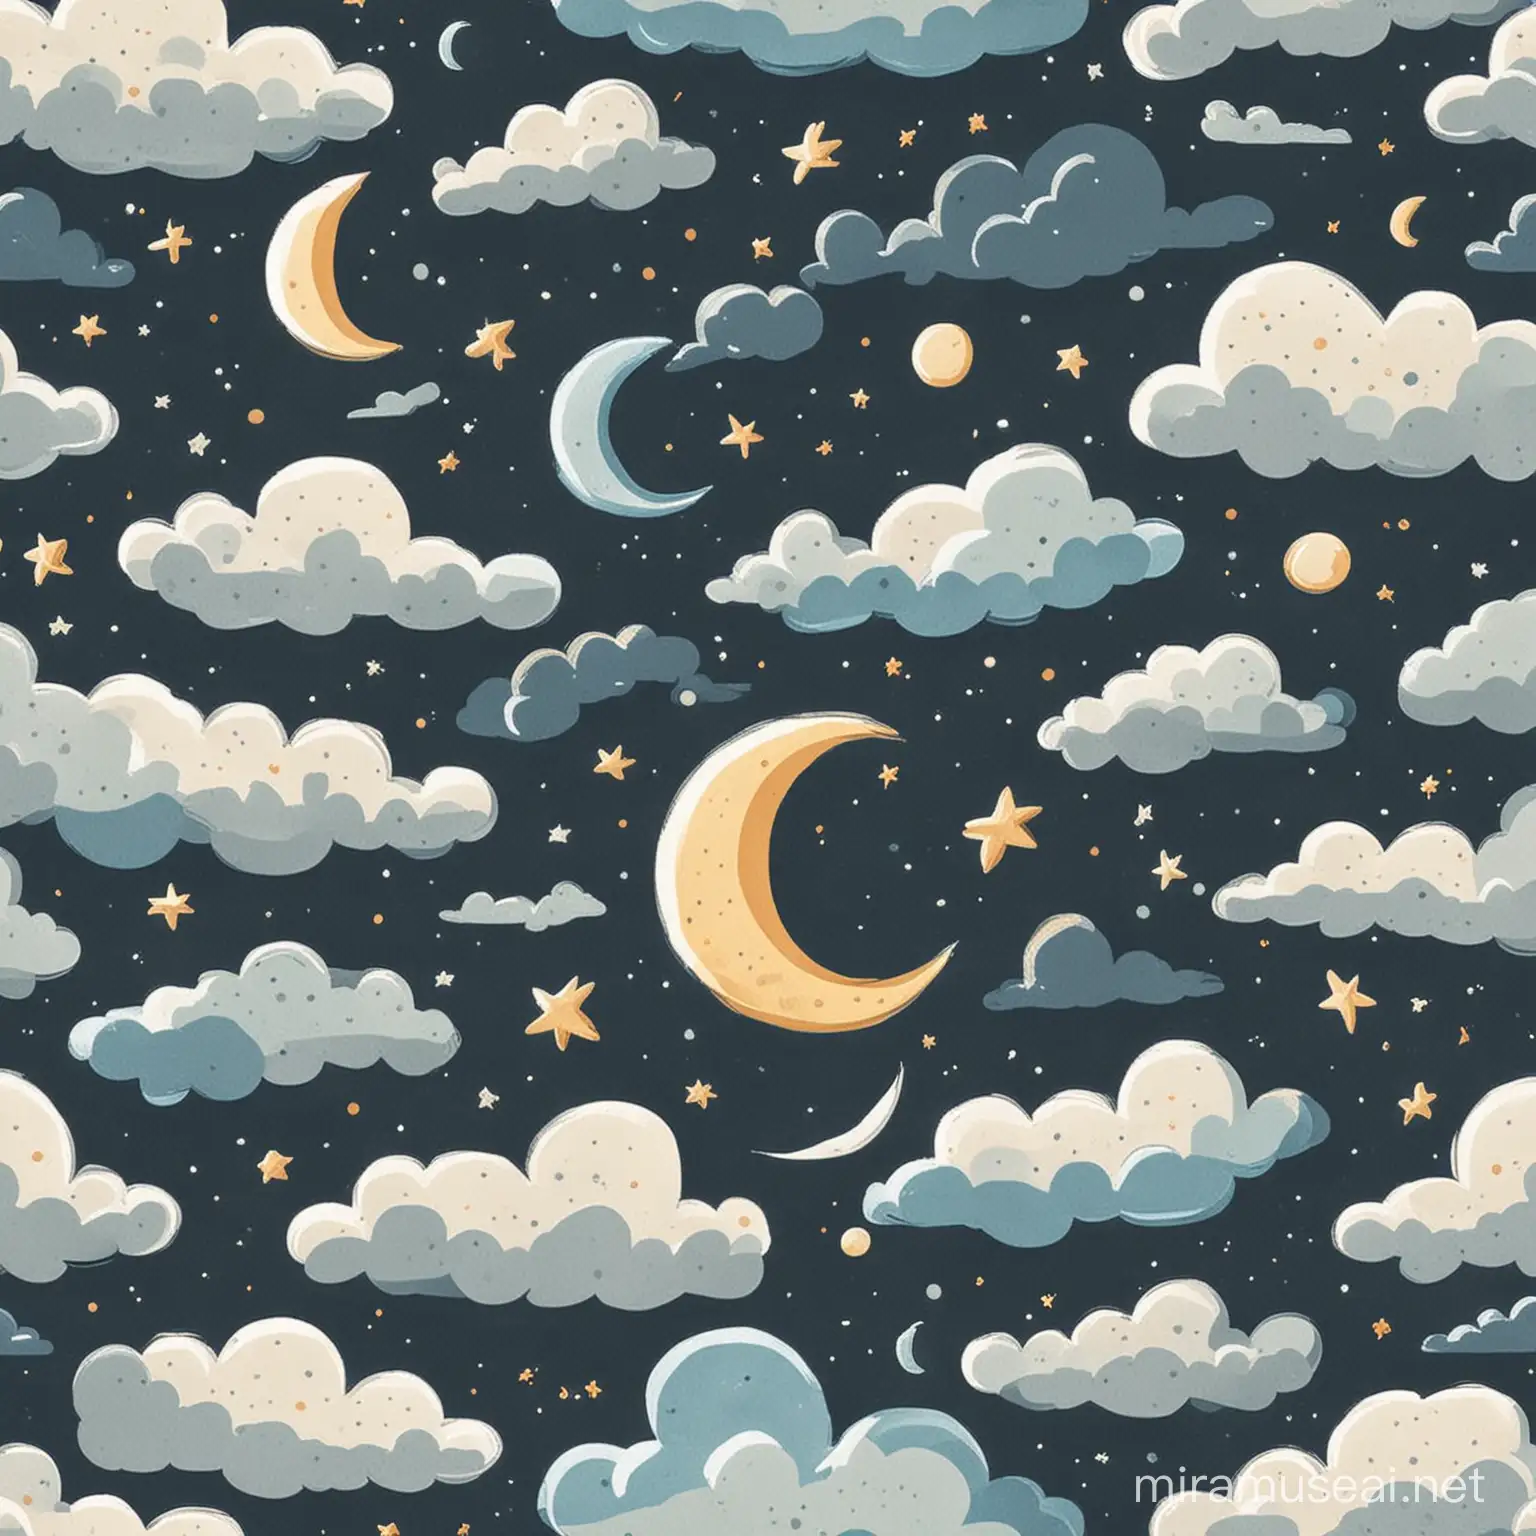 Whimsical Cartoon Clouds and Moons Floating in a Starlit Sky